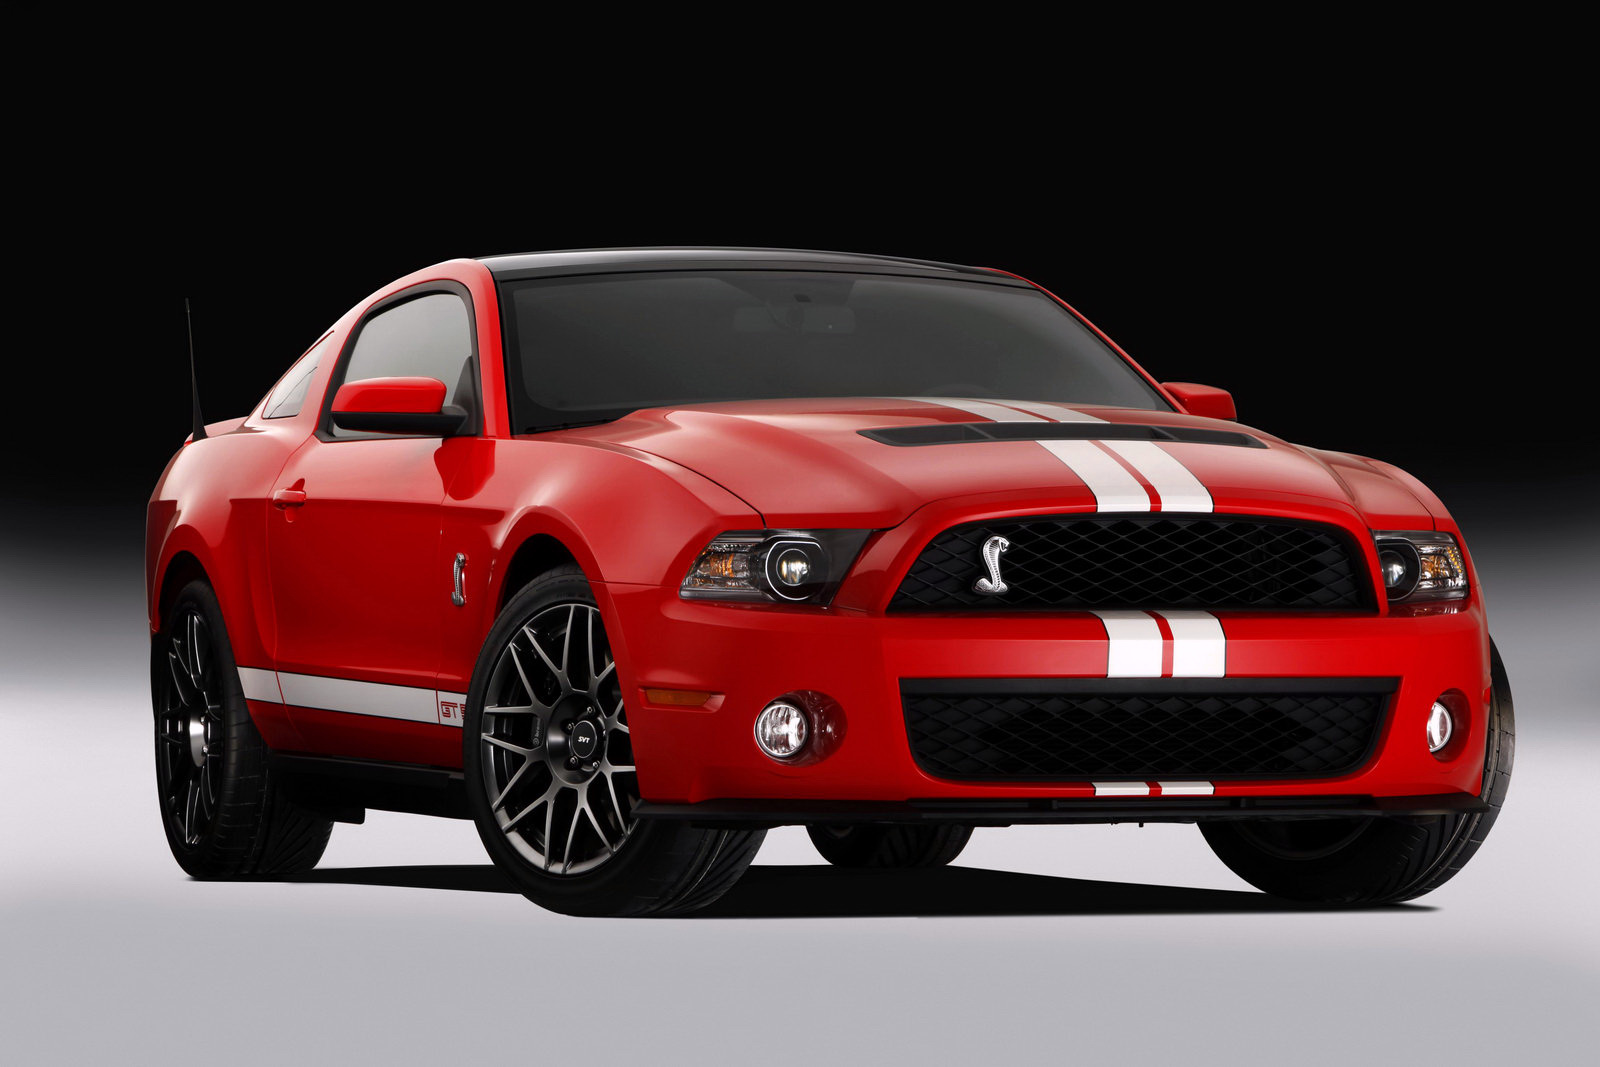 2011 Ford Mustang Shelby GT500 Wallpaper HD